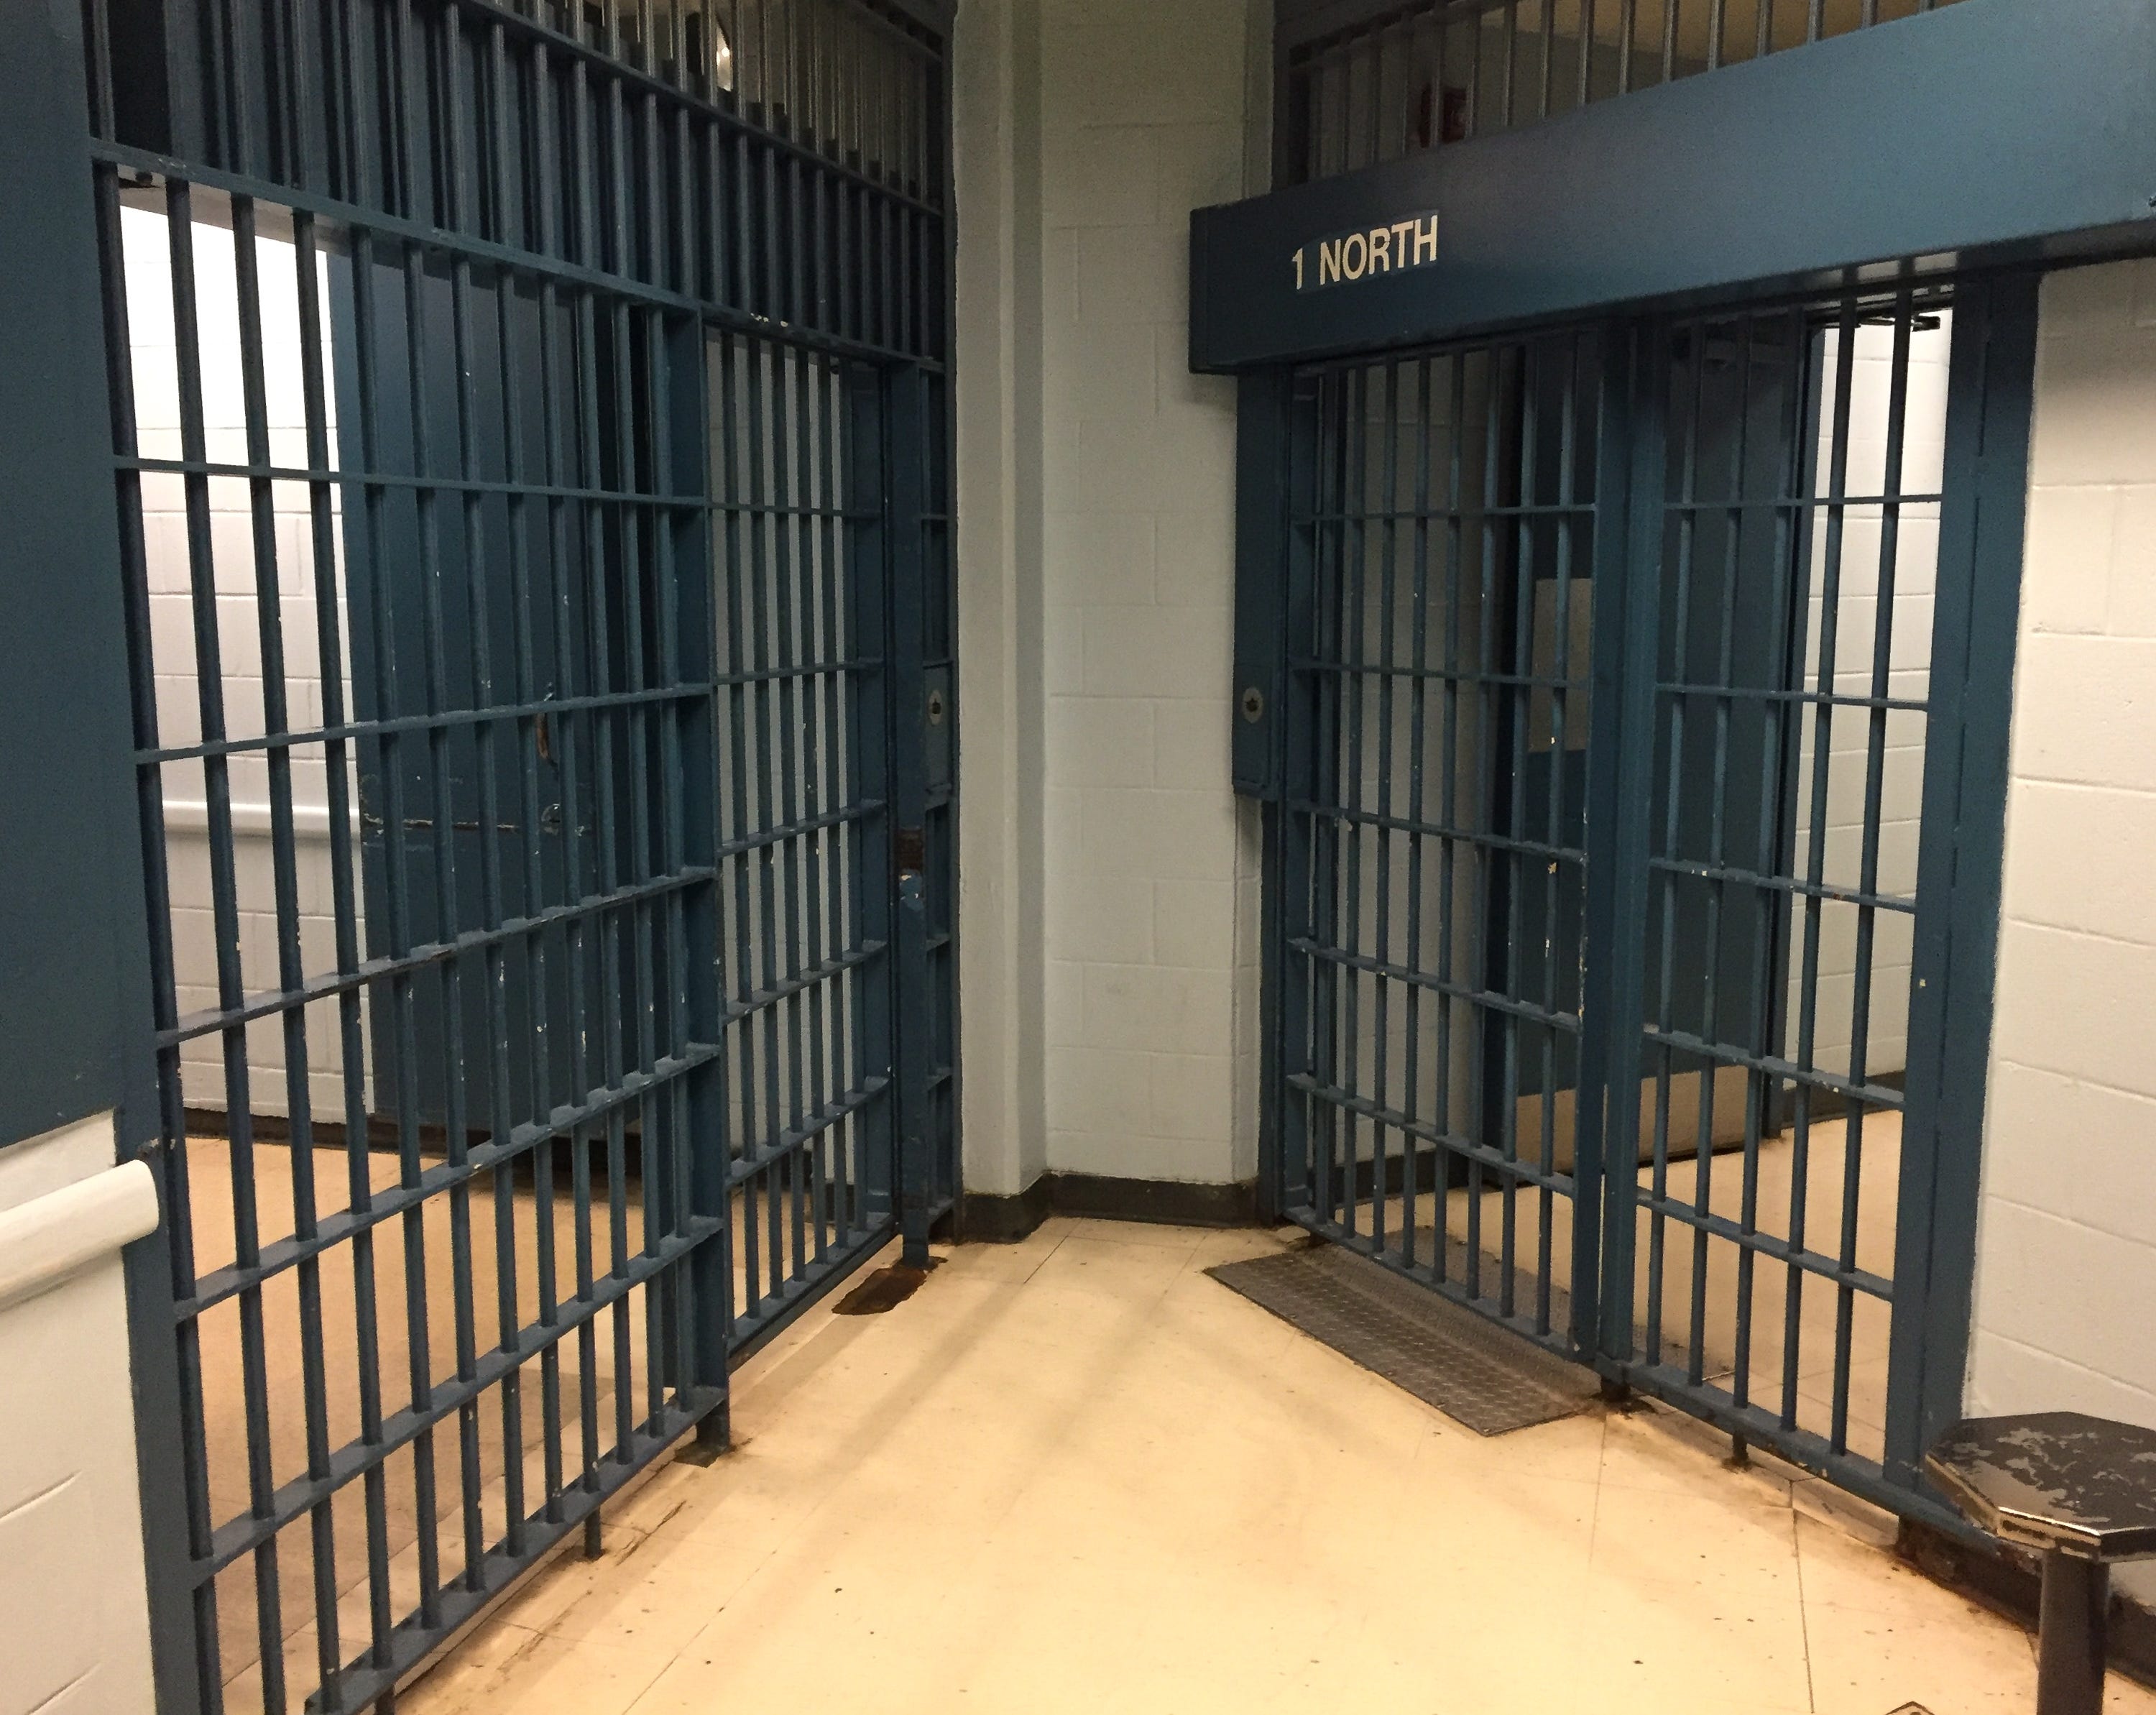 Sarasota County inches forward with jail overcrowding solution.